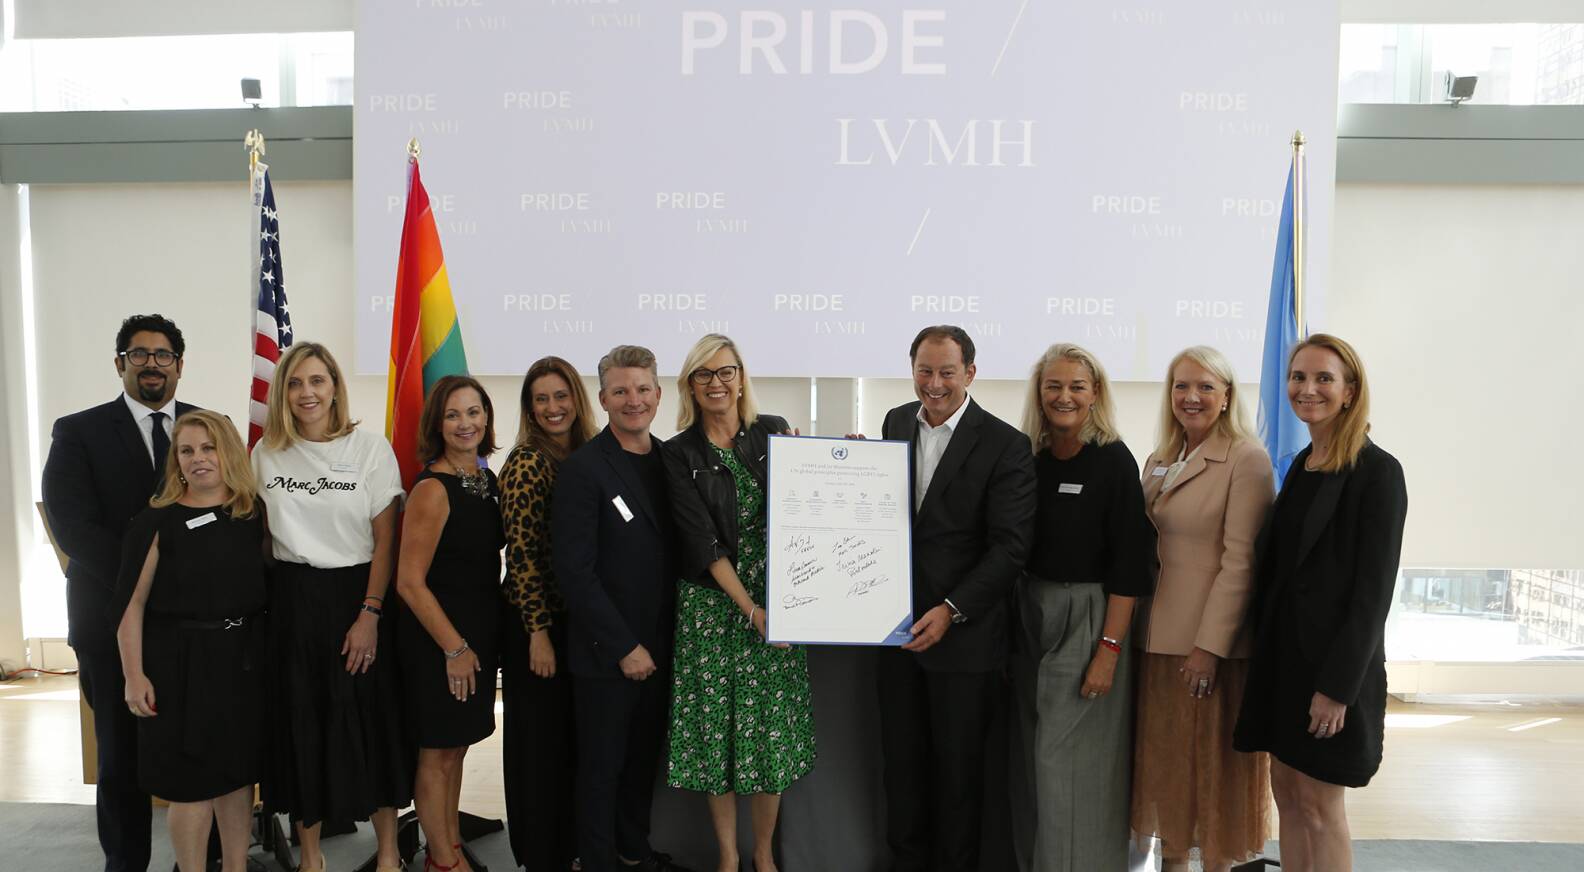 LVMH boosts its engagement against discrimination